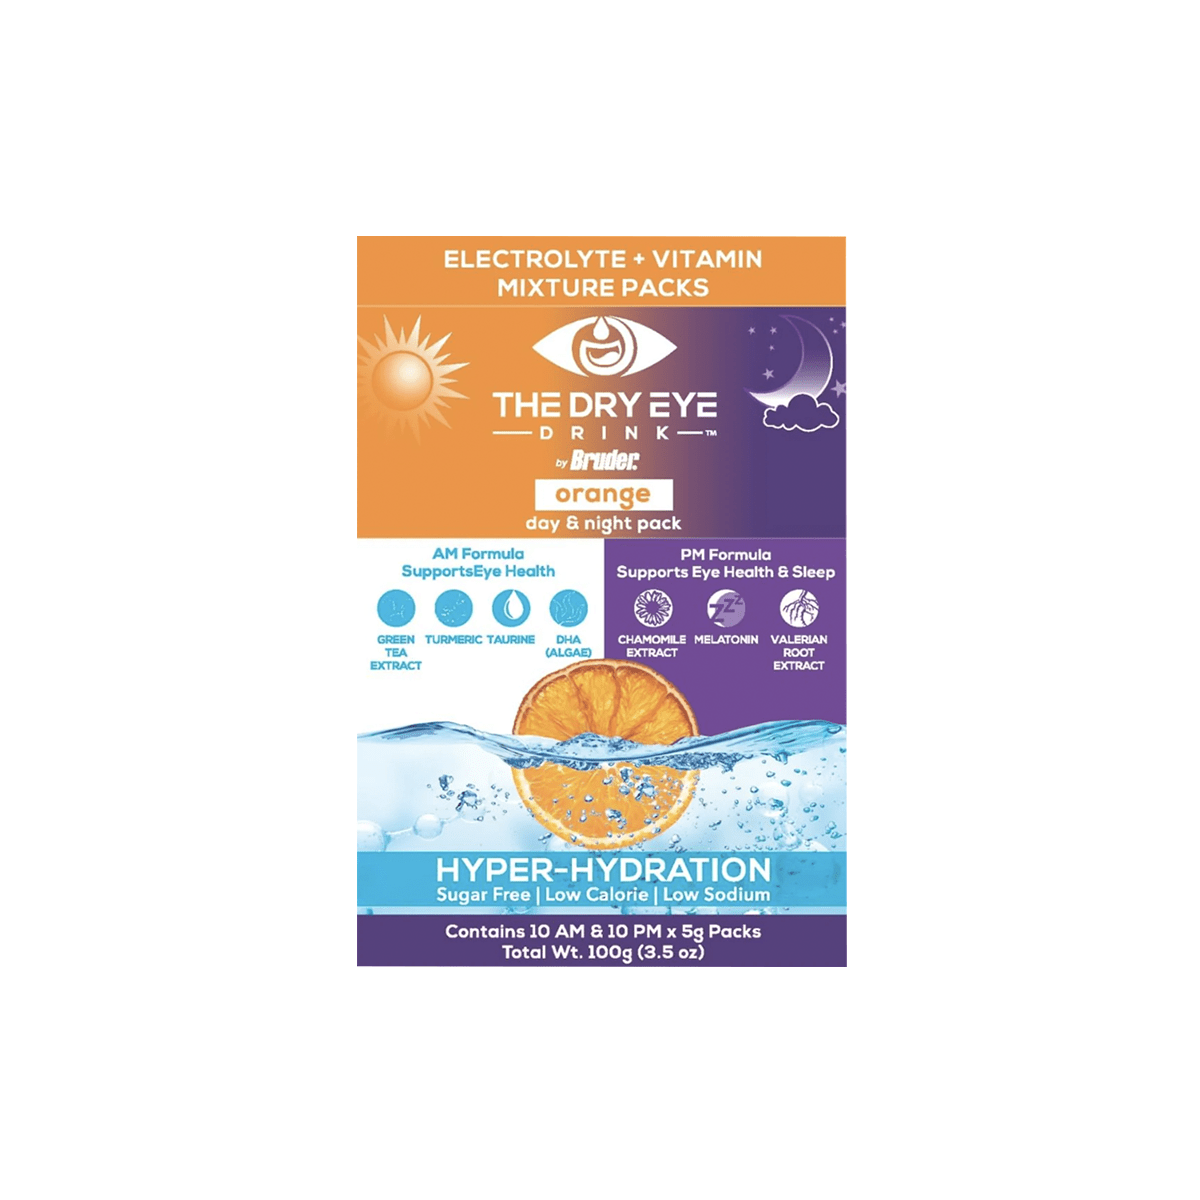 The Dry Eye Drink the Ultimate Hydration for Dry Eyes, Sugar-Free Electrolyte Powder Packets, Blended with Vitamins, Green Tea, Turmeric, Taurine, and Omega 3 (20 Packets of Orange AM/PM) - Dryeye Rescue